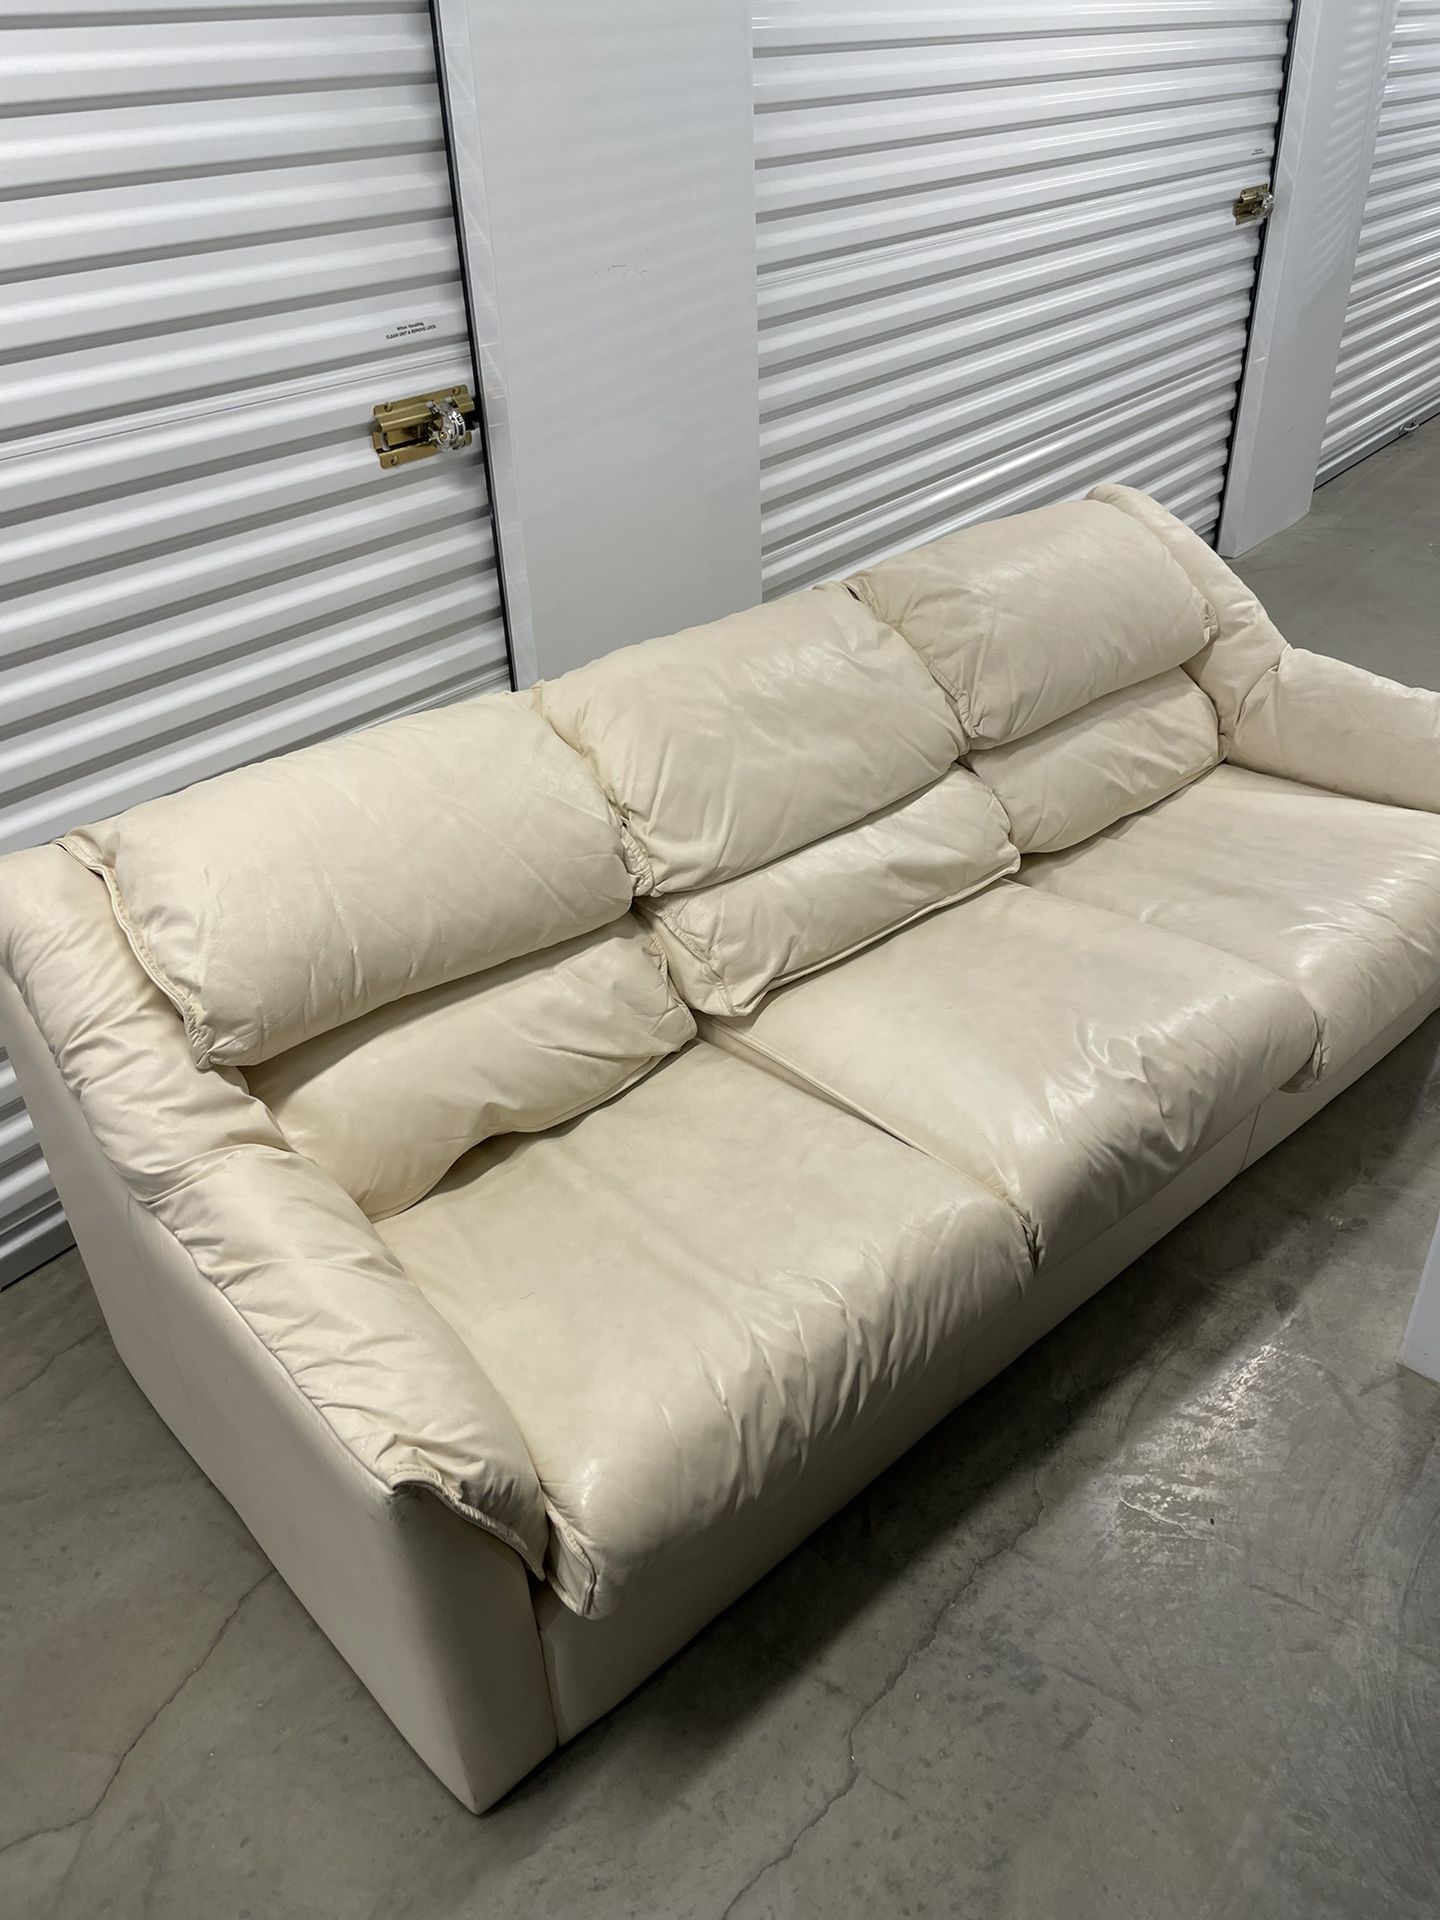 Vintage Leather 3-seater Sleeper Couch